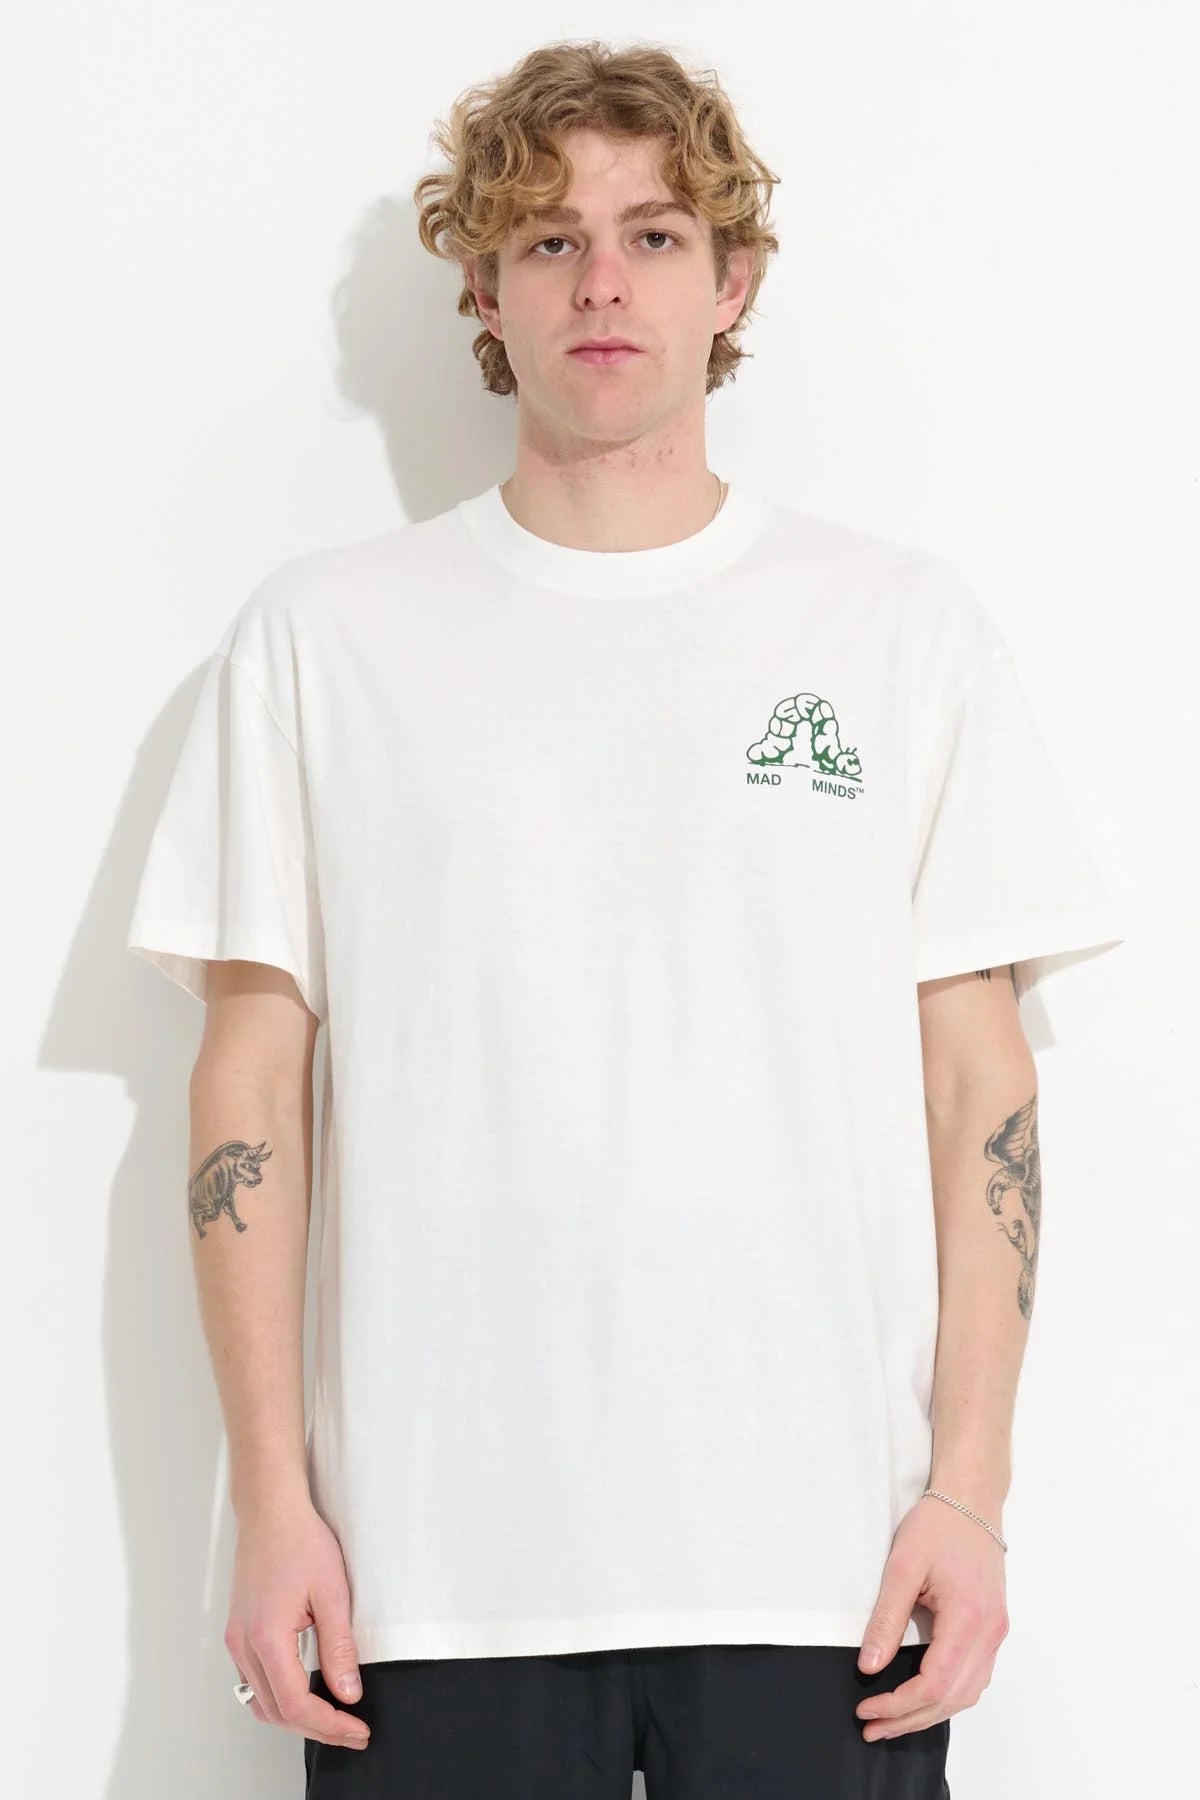 MISFIT Third Cycle ss Tee - pigthrwht